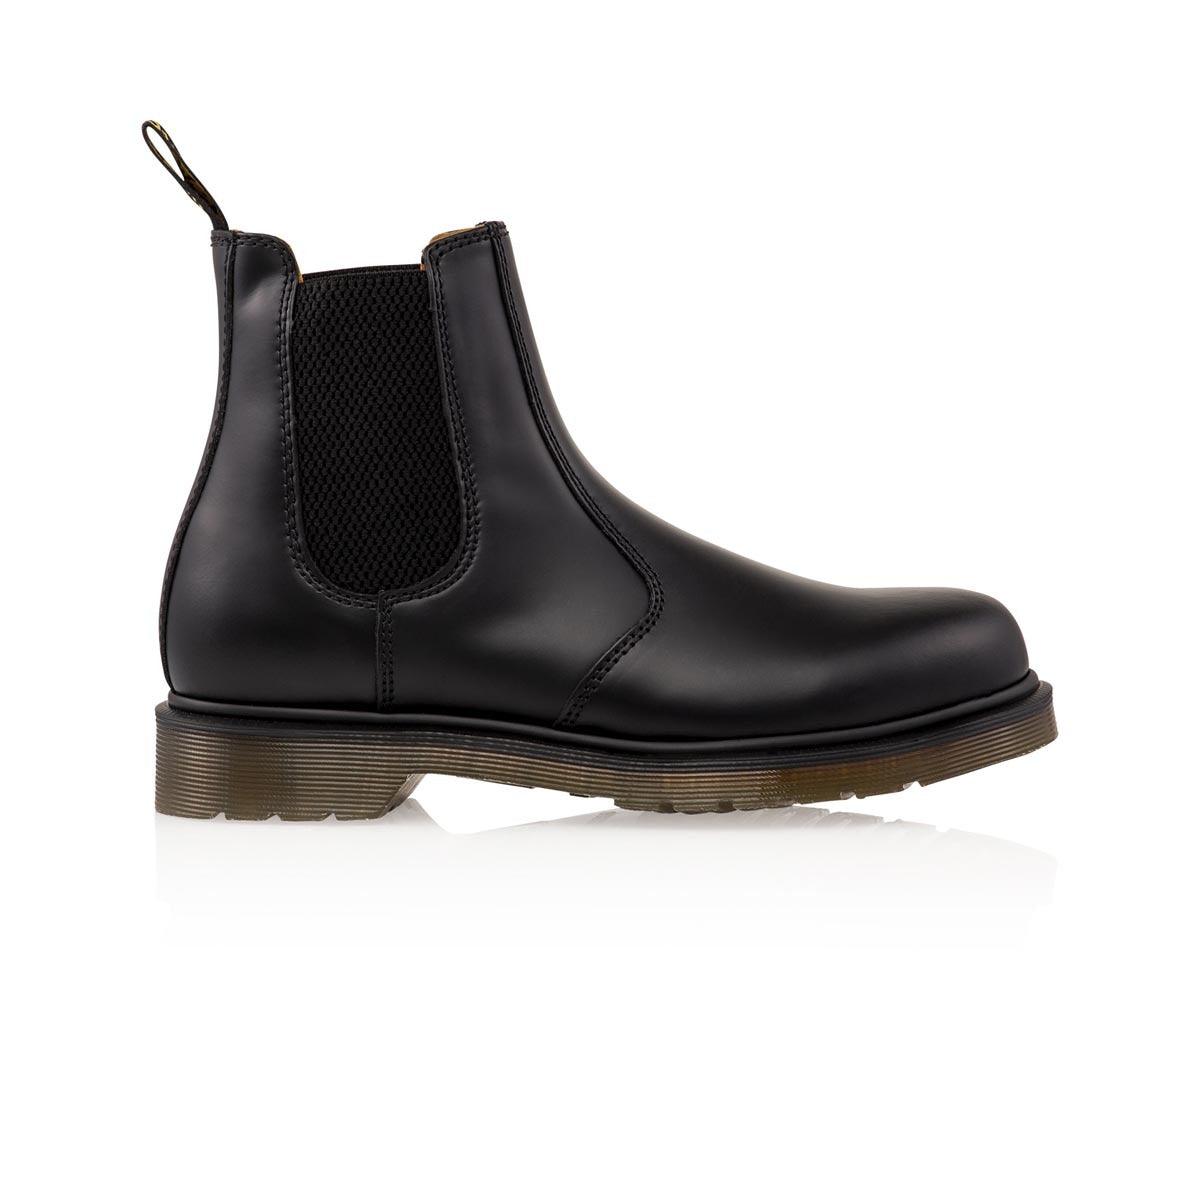 Dr Martens 2976 Smooth - The Next Pair